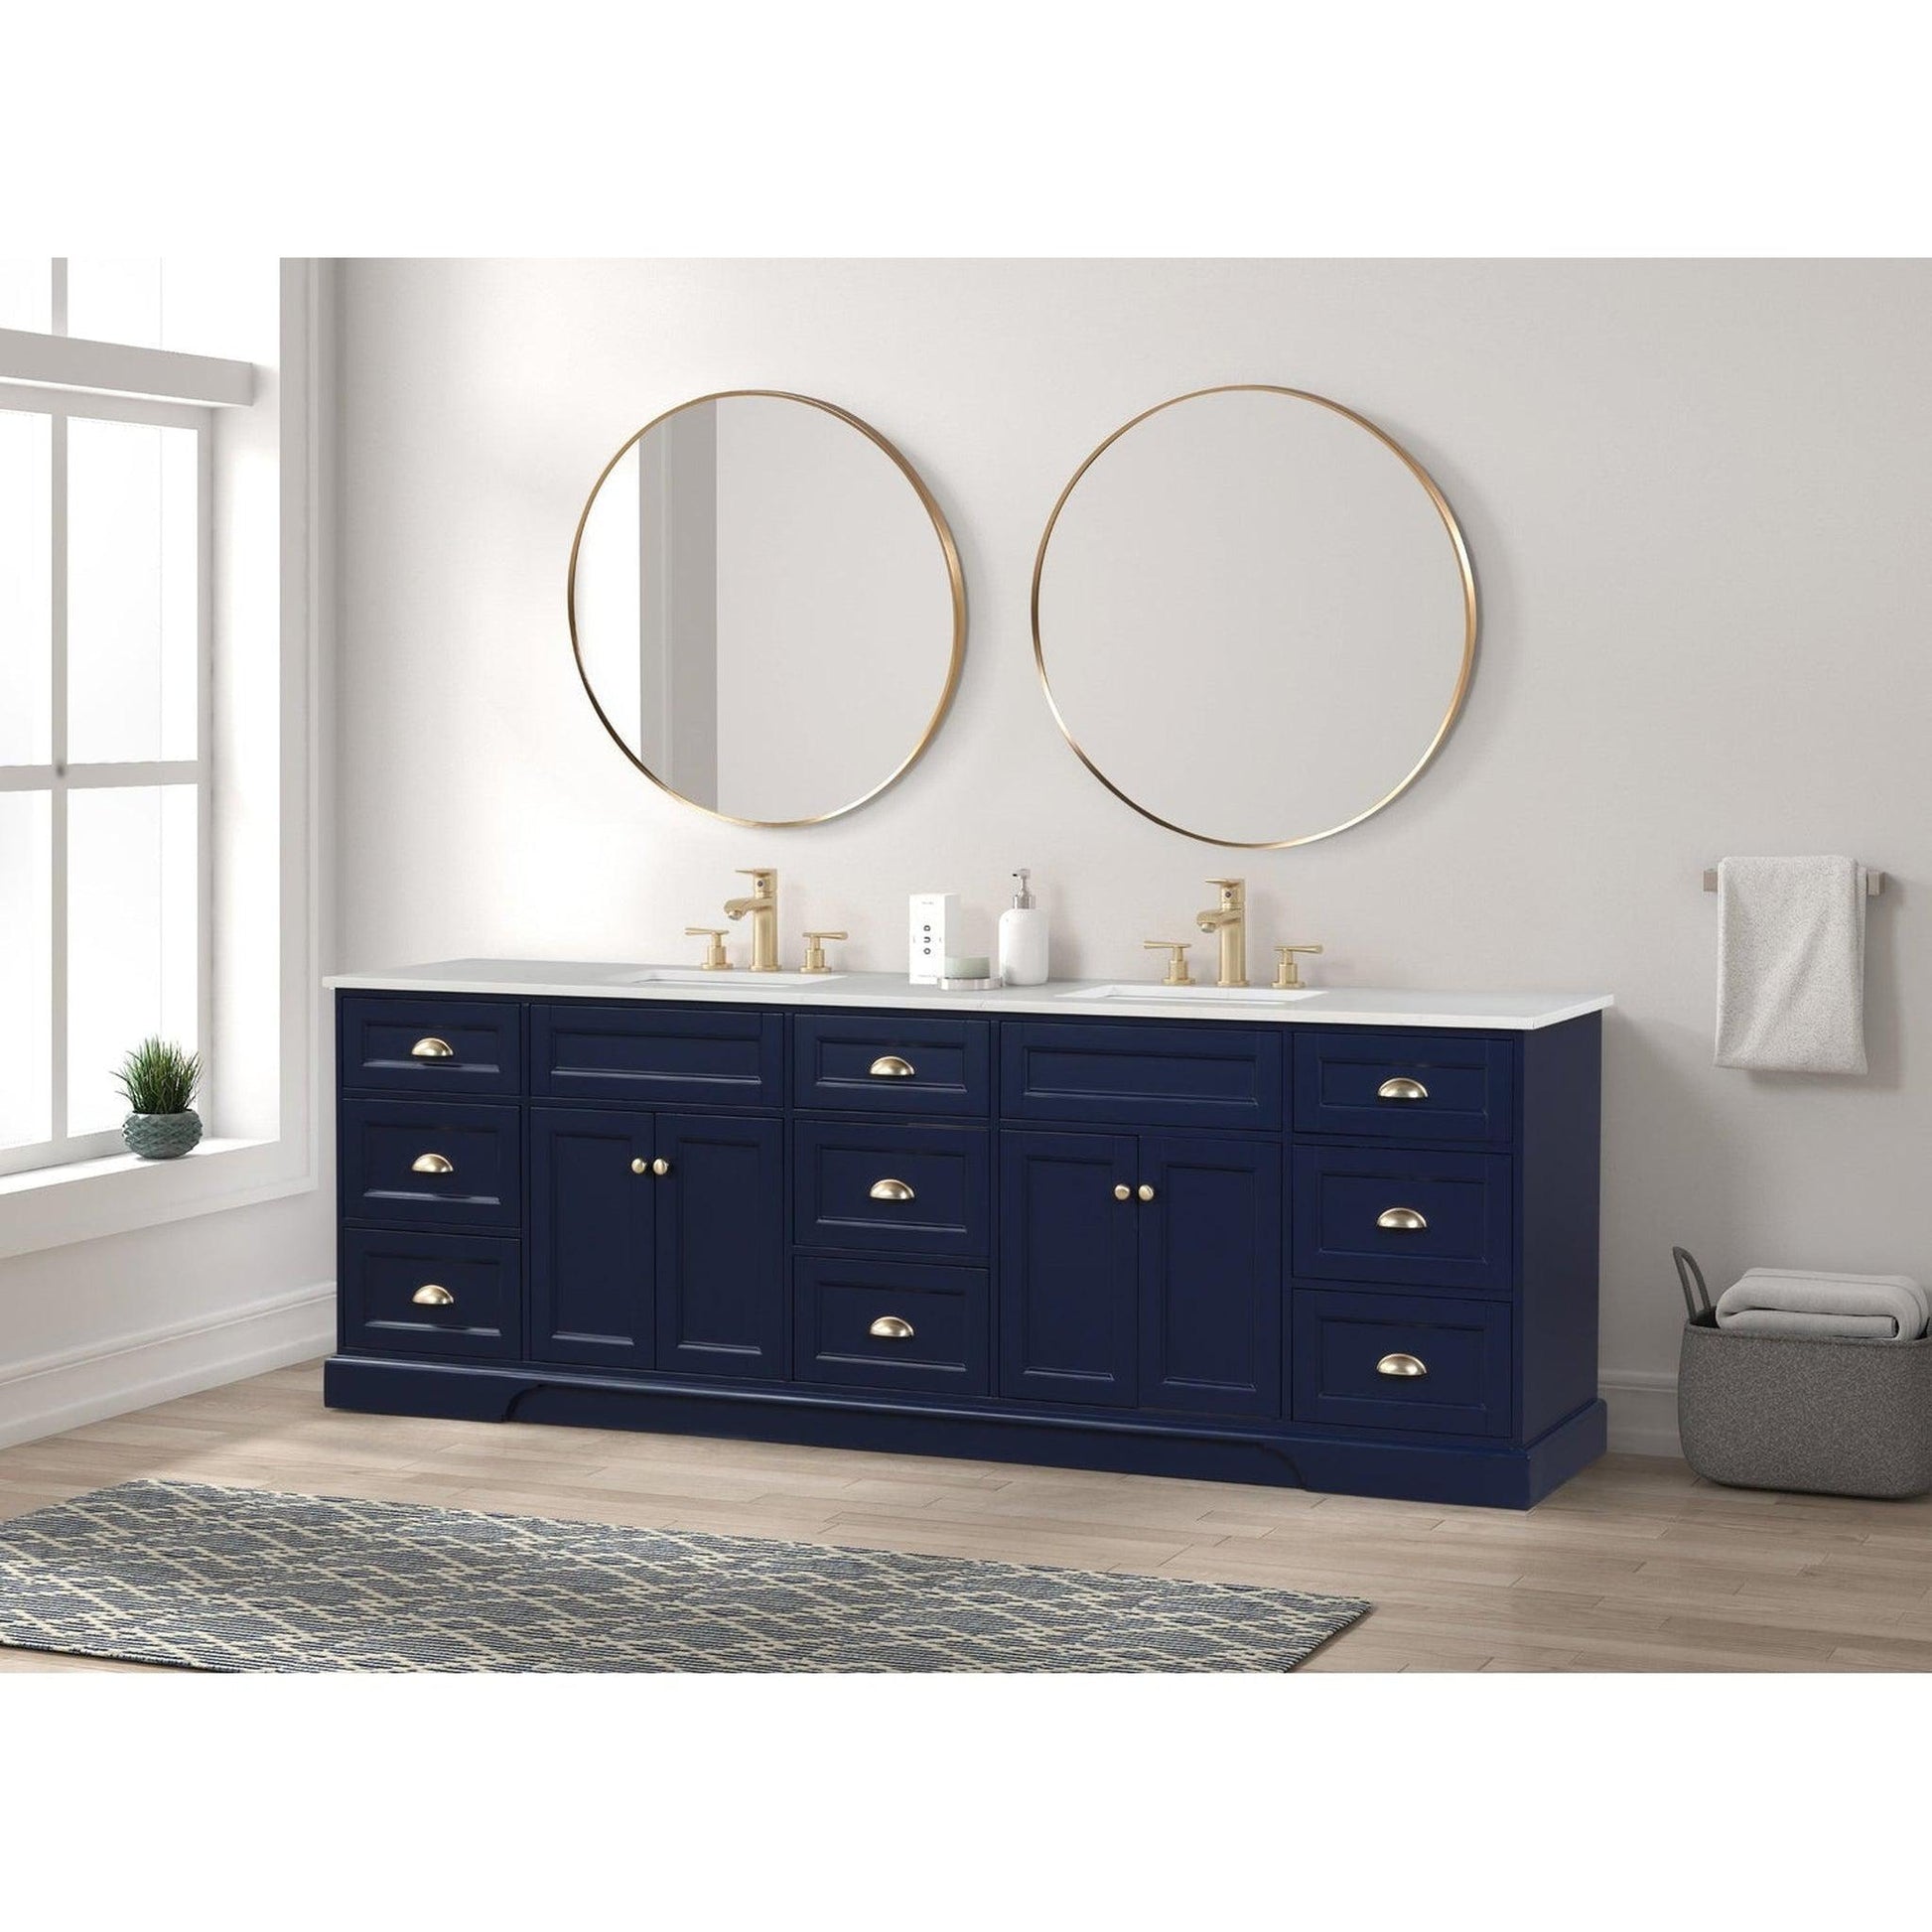 Eviva Epic 96" x 34" Blue Freestanding Bathroom Vanity With Brushed Gold Hardware and Quartz Countertop With Double Undermount Sink